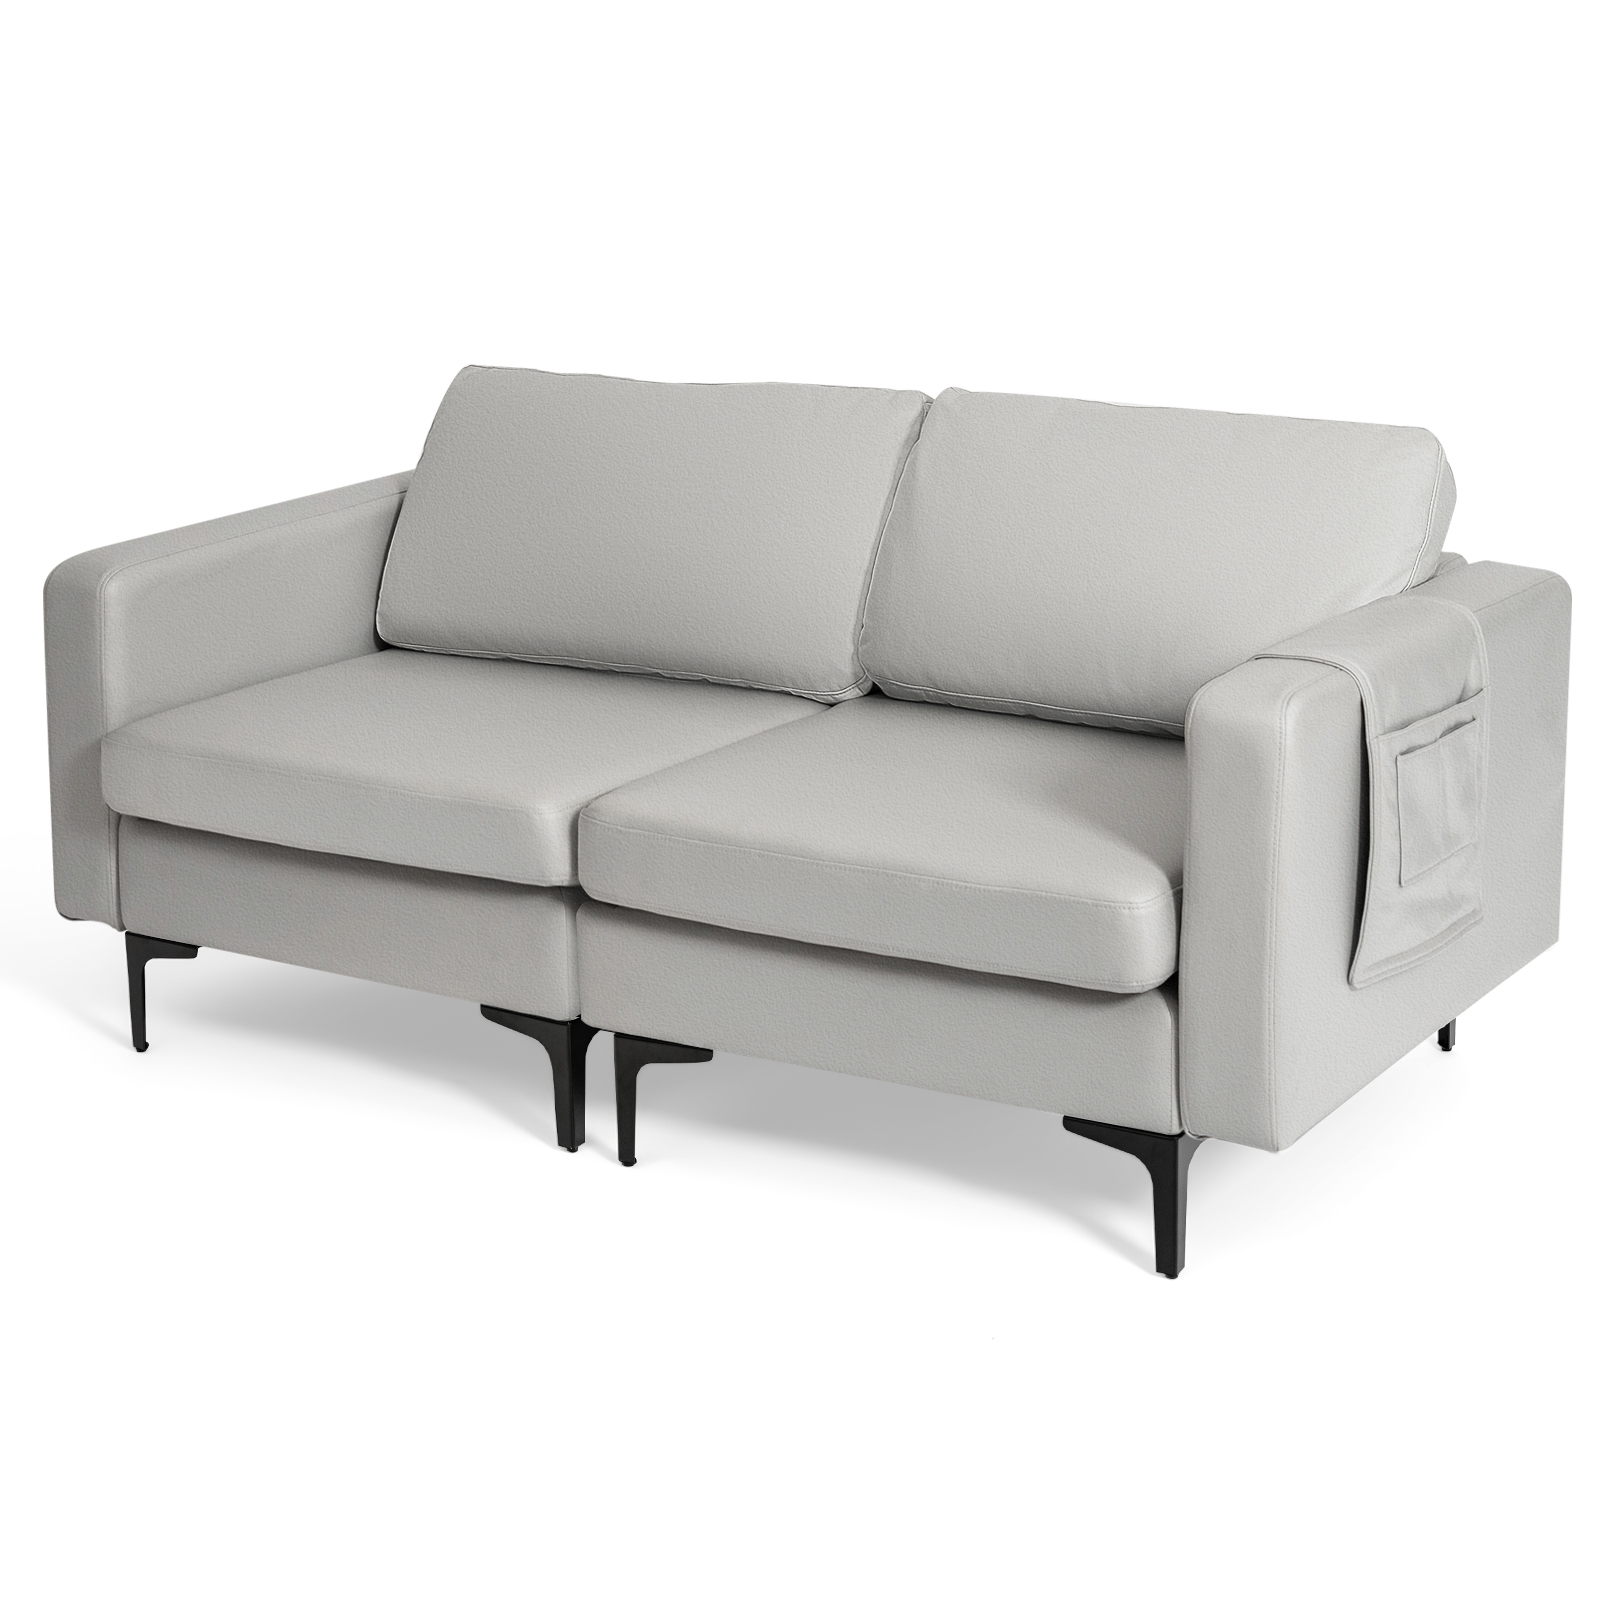 Modern 2-Seat Modern Sofa Couch with Detachable Remote Control Holder-Light Grey